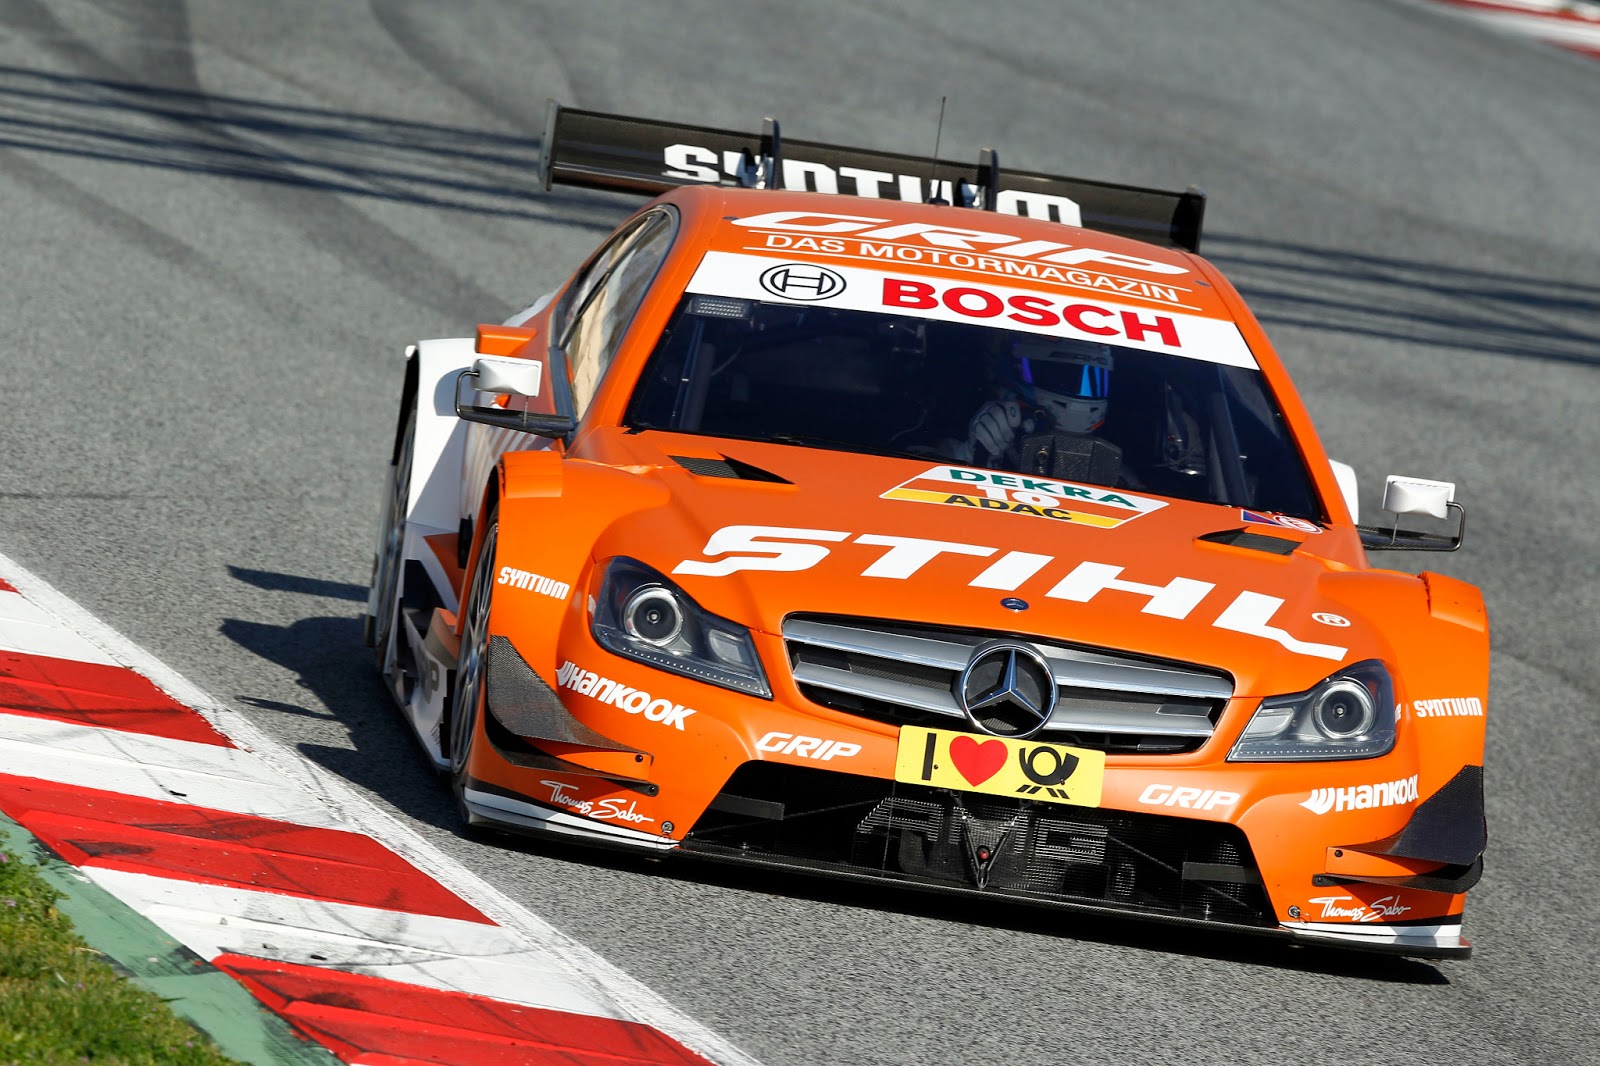 STIHL Global Announces Expanded Role in DTM Auto Racing Series